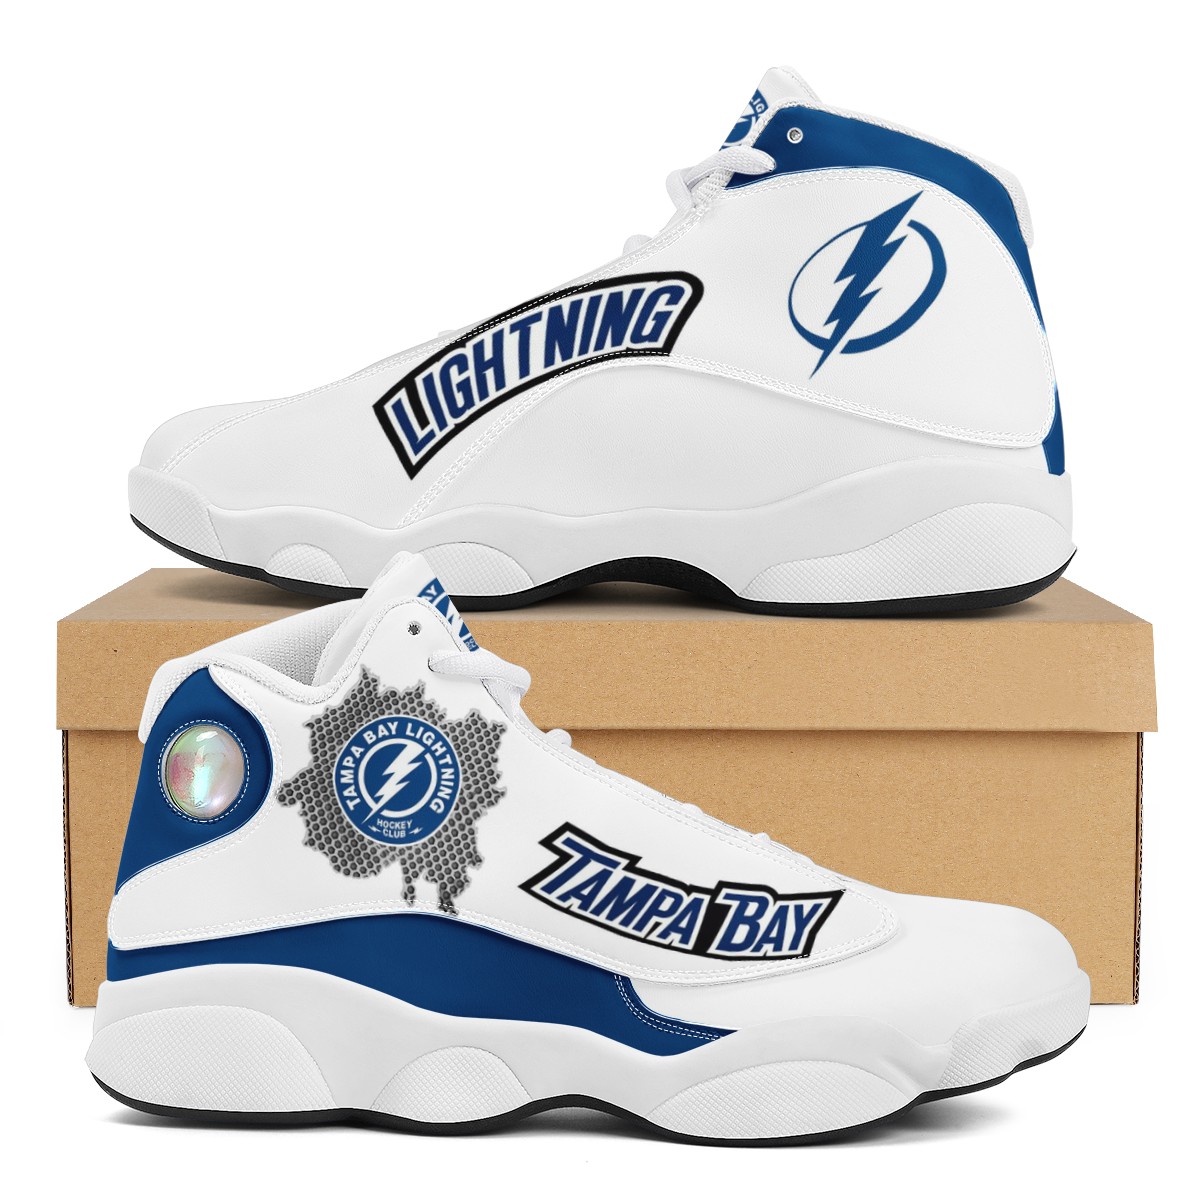 Women's Tampa Bay Lightning Limited Edition JD13 Sneakers 001